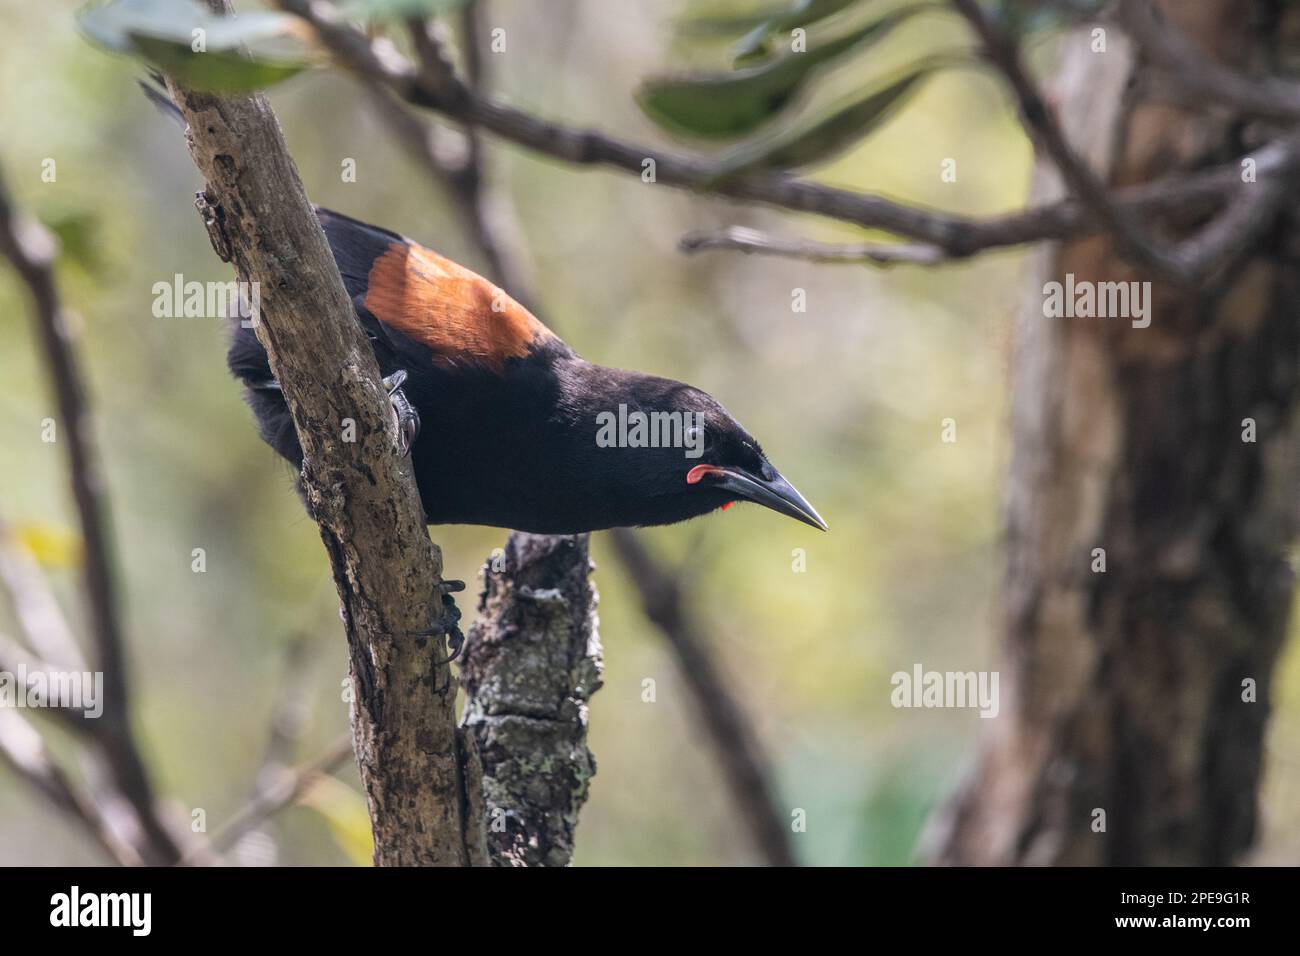 A North Island saddleback (Philesturnus rufusater), an endemic and endangered bird from Aotearoa New Zealand. Stock Photo